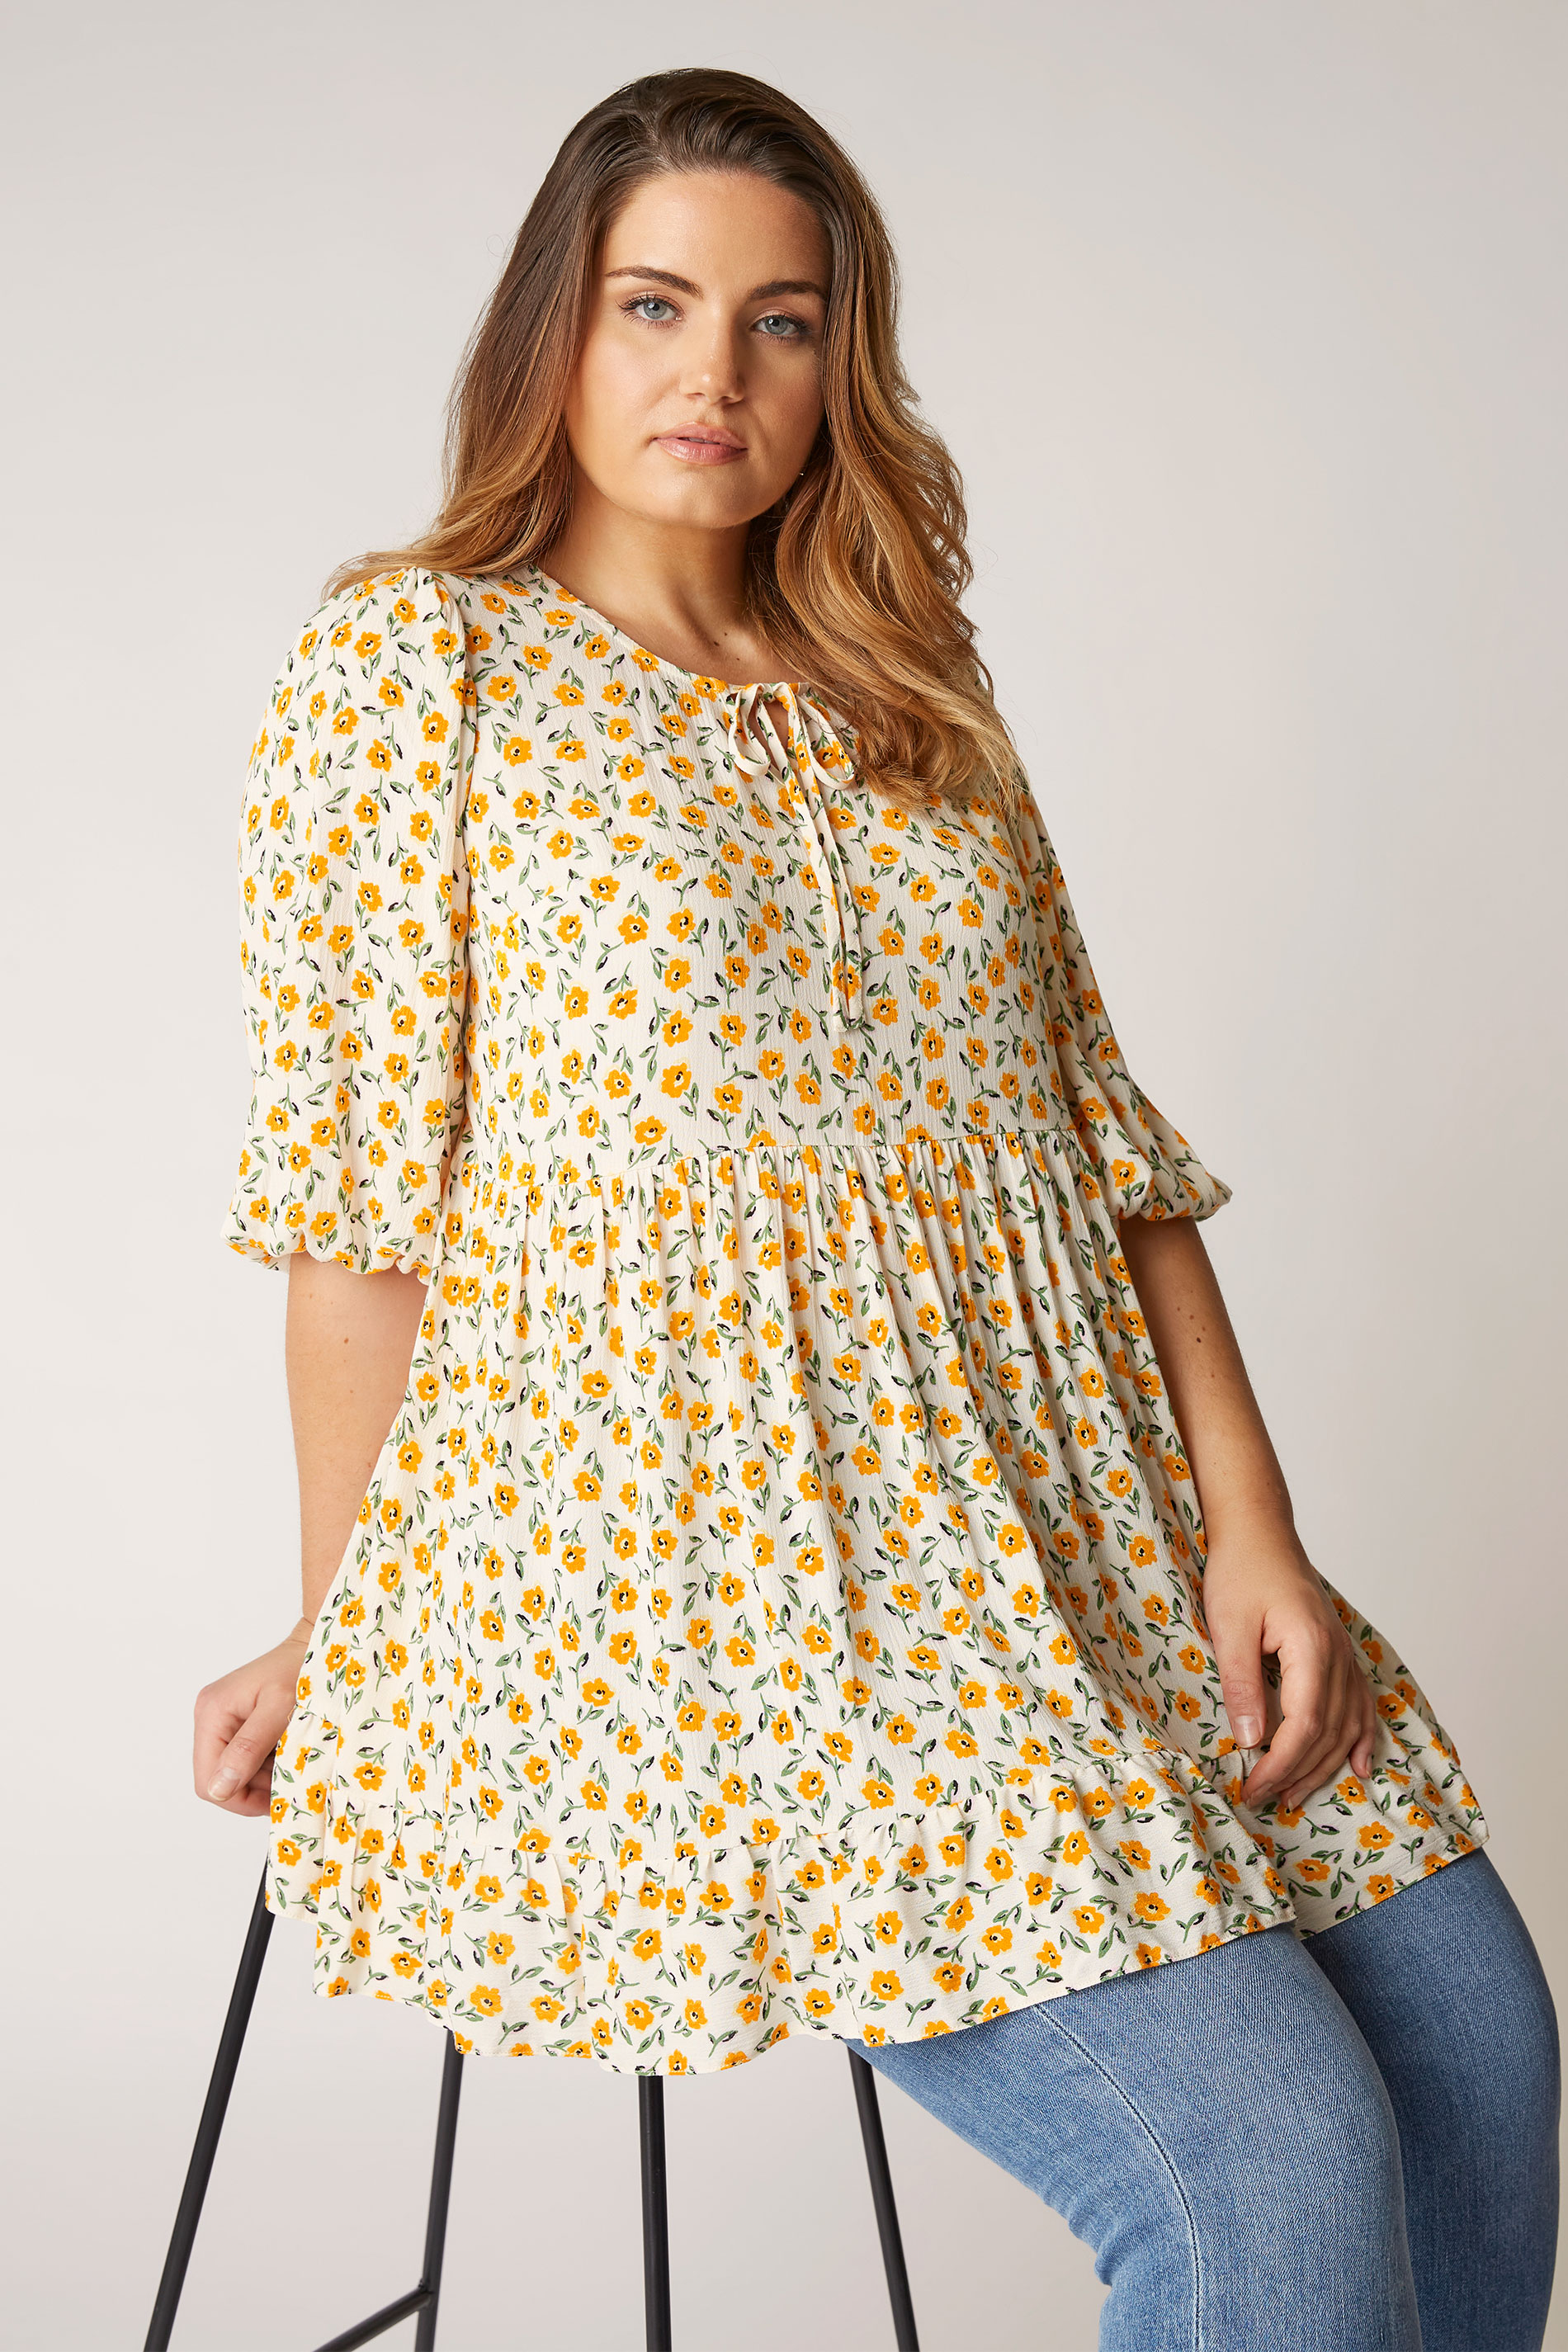 THE LIMITED EDIT White Floral Frill Hem Tunic